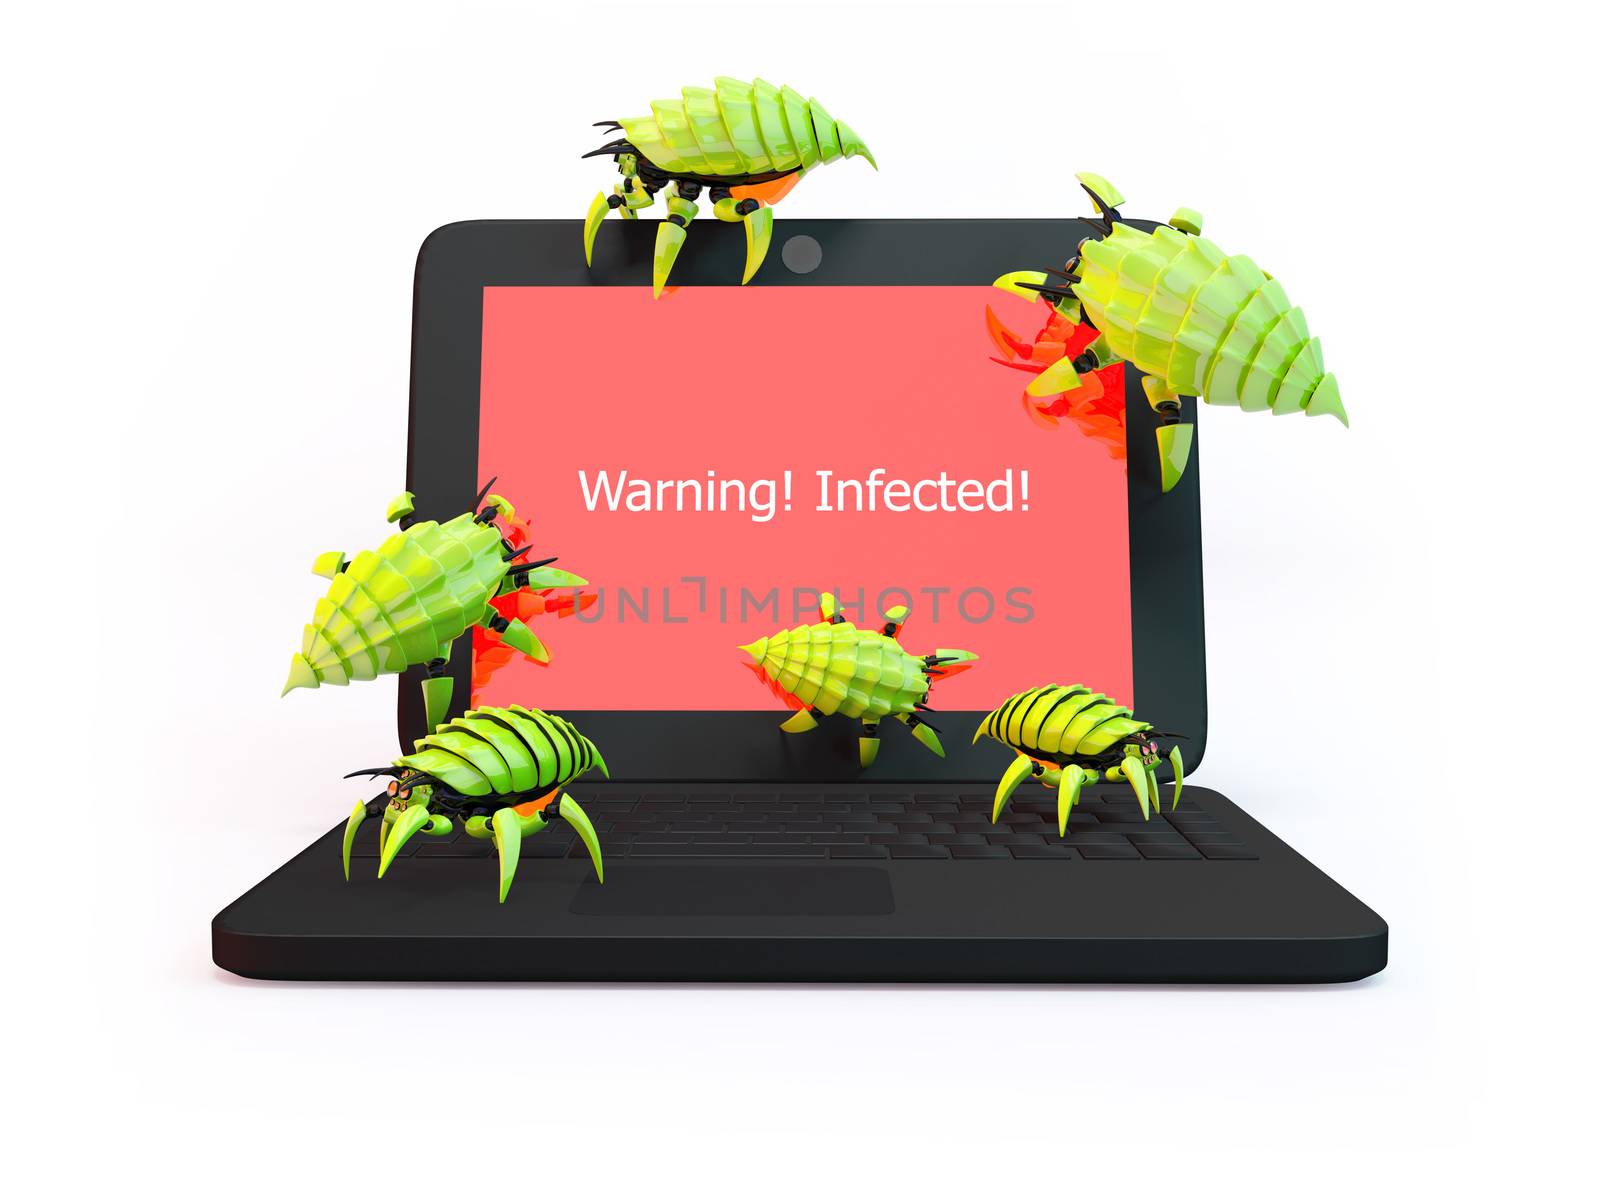 Viruses attack laptop by Lixell